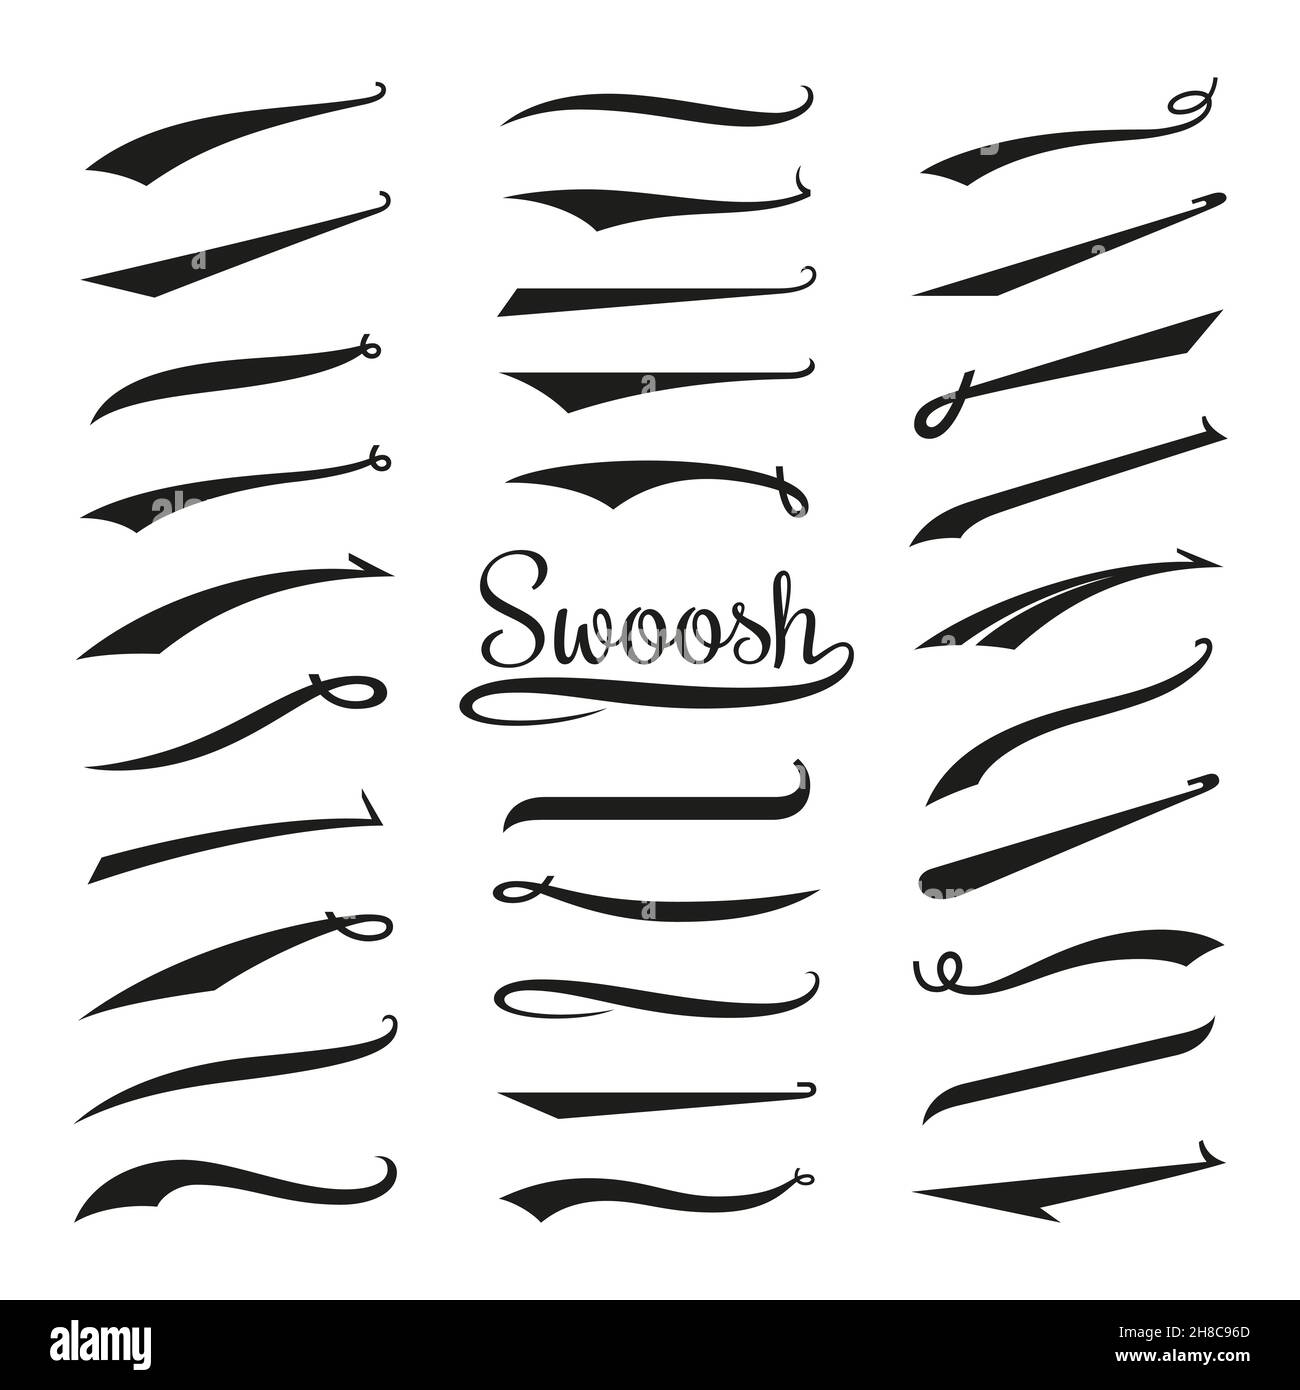 Page 7  Fonts With Swoosh Tails Images - Free Download on Freepik